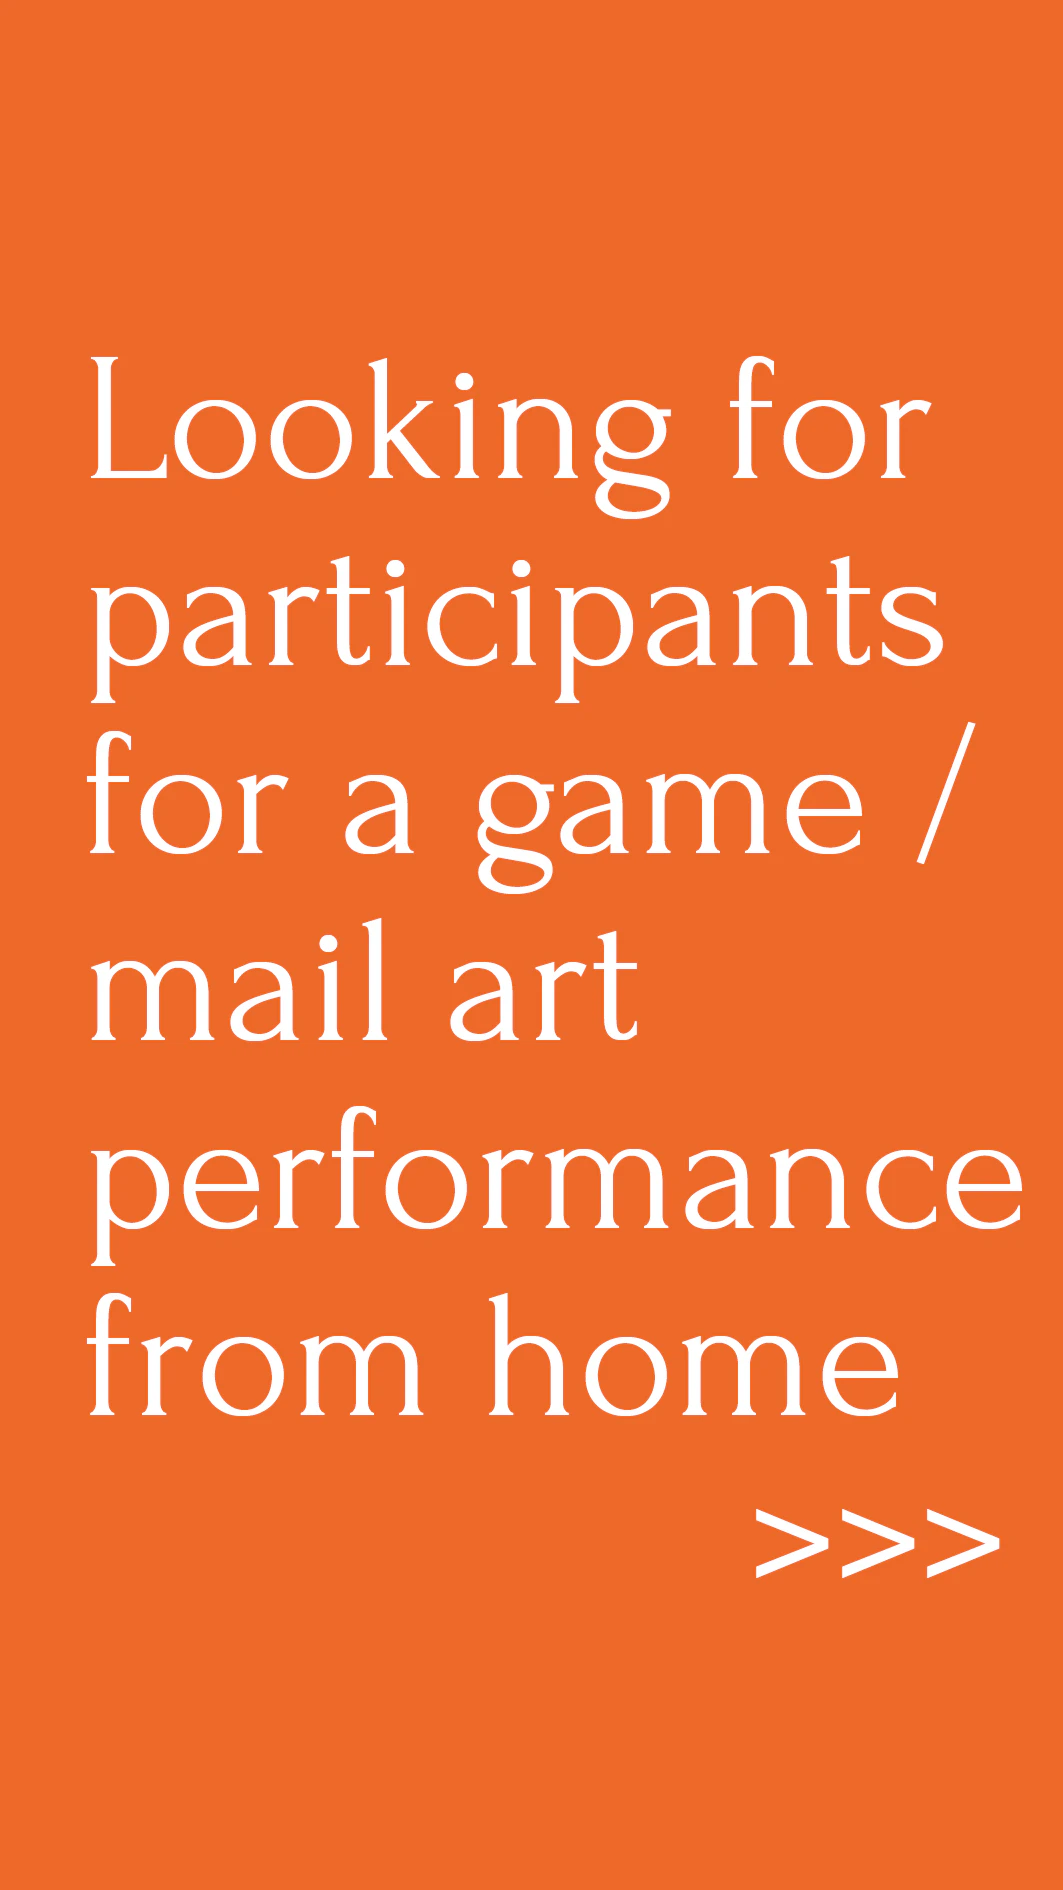 LOOKING FOR PARTICIPANTS FOR A GAME /MAIL ART PERFORMANCE - FROM HOME